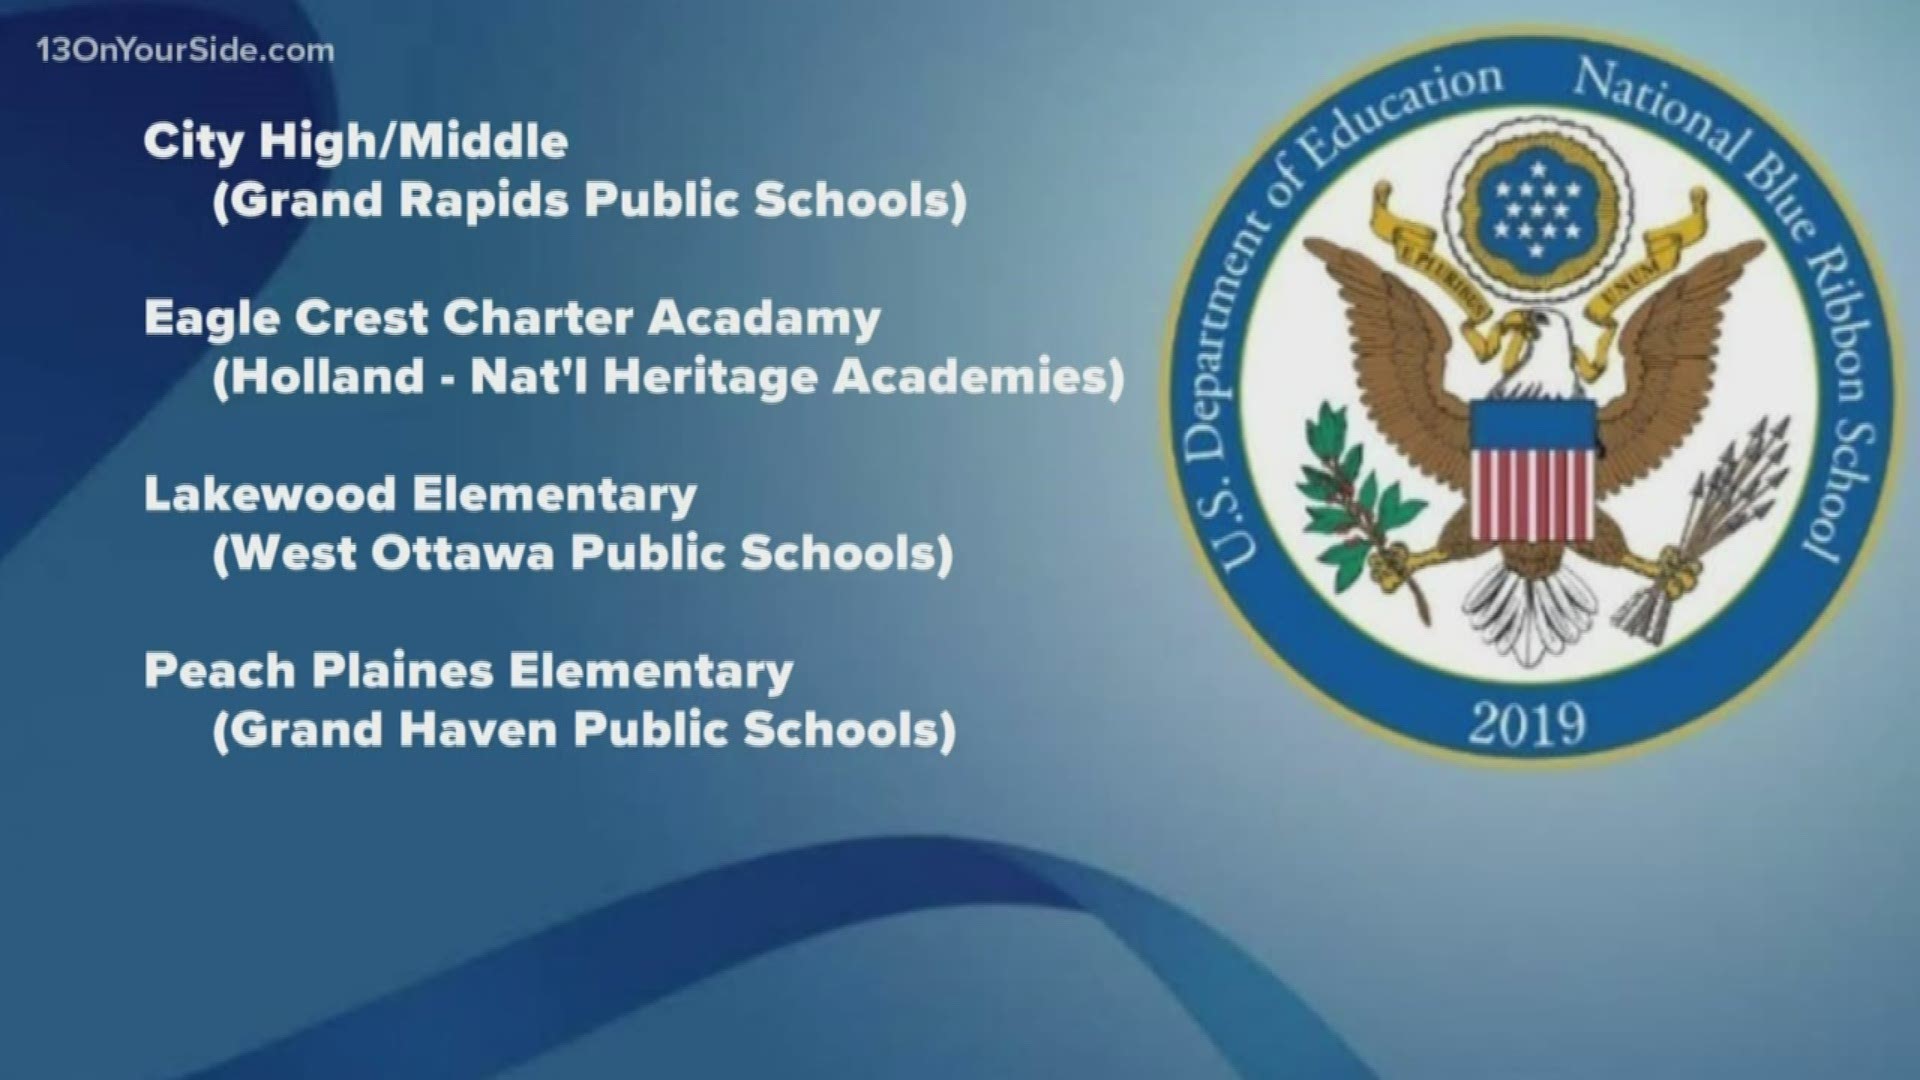 The award recognizes public and non-public schools for teaching at high standards. There are 13 Michigan schools in all that have received the designation.